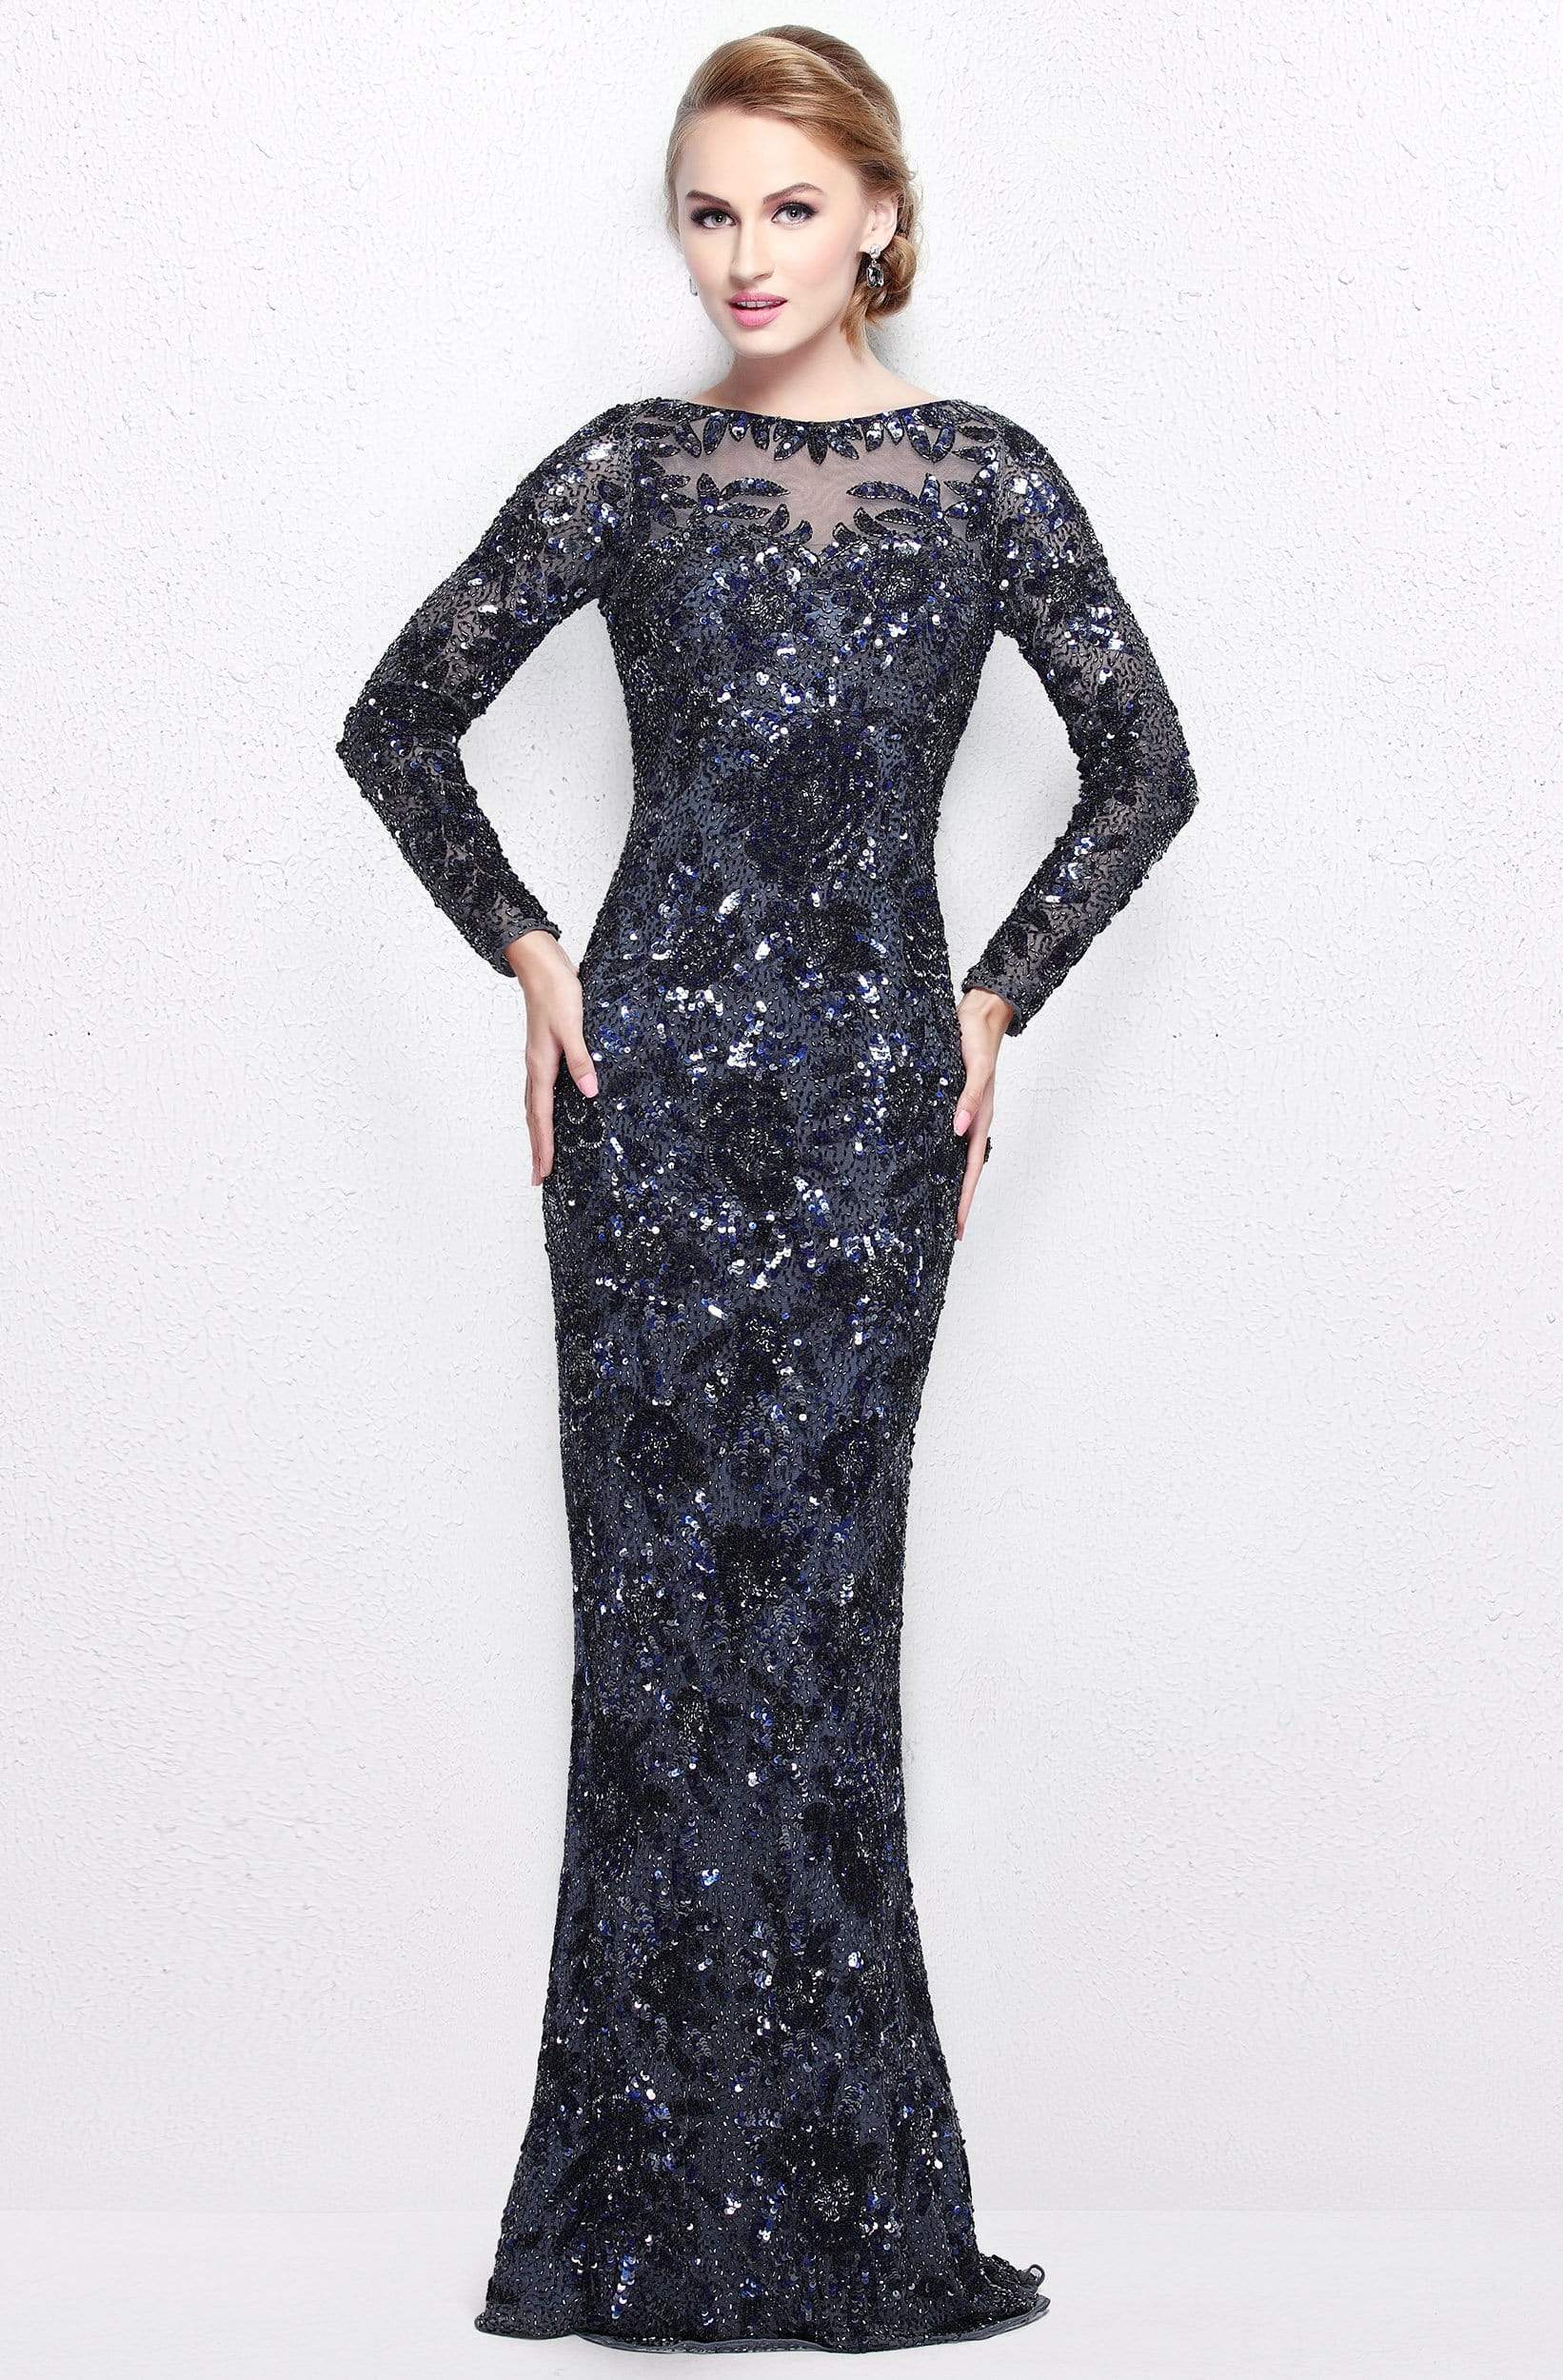 Primavera Couture - Long Sleeve Luxurious Floral Sequined Long Sheath Gown 1401
